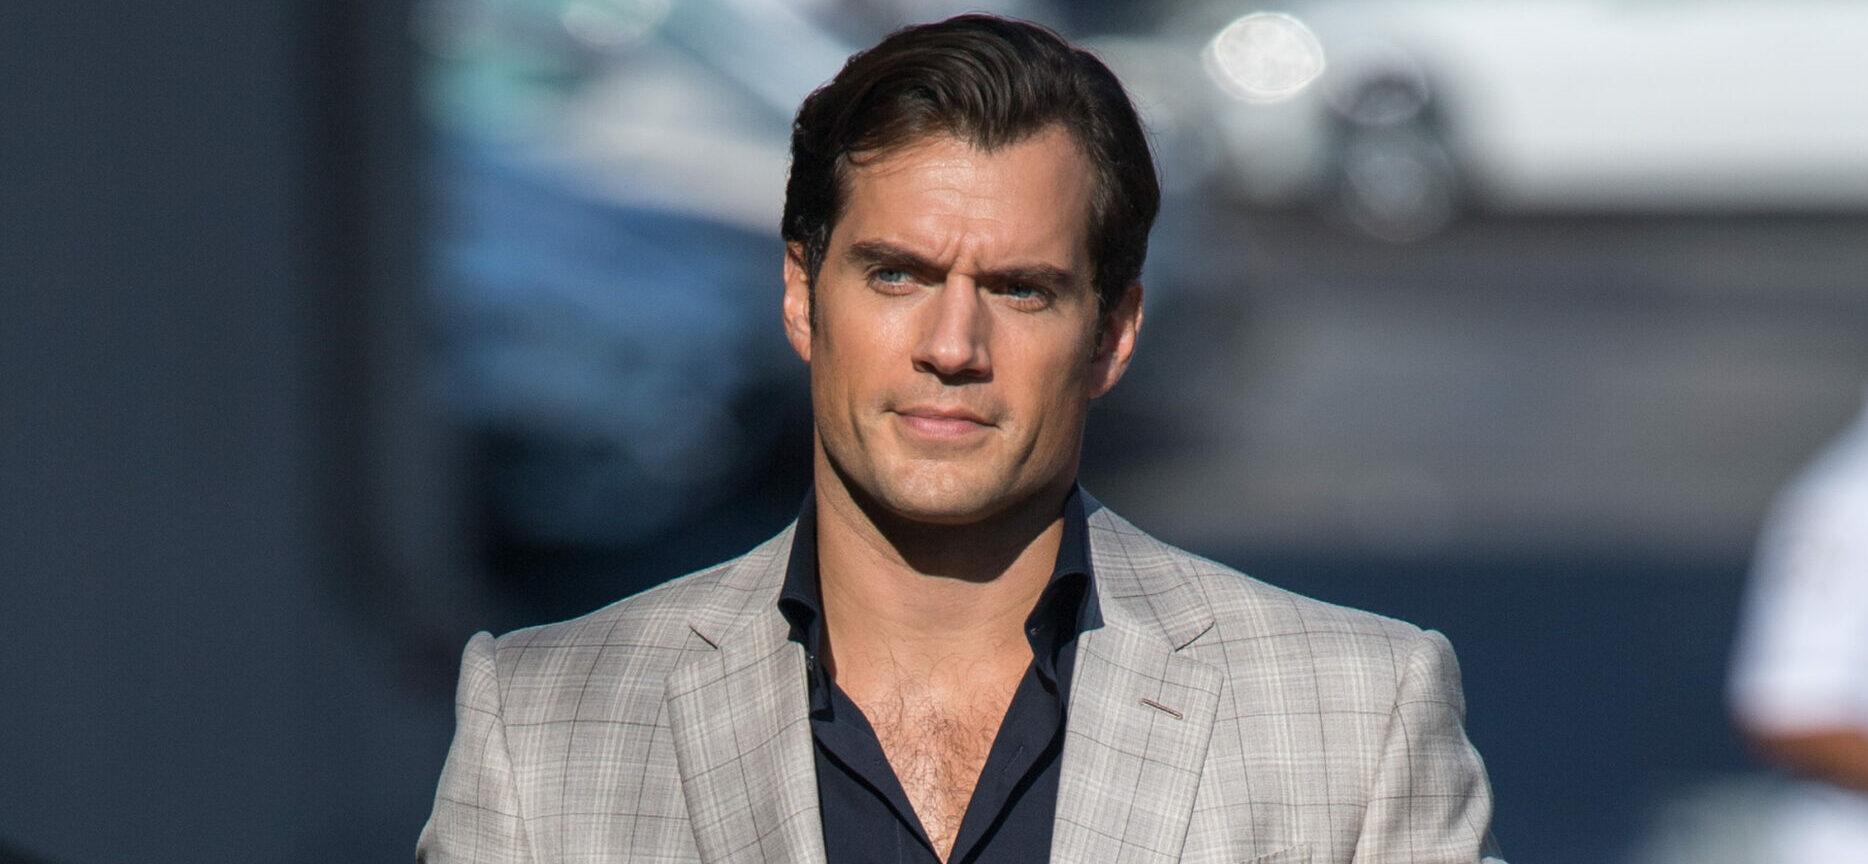 Henry Cavill at 'Kimmel' sporting a gray striped suit and pant paired with a black inner T-shirt.